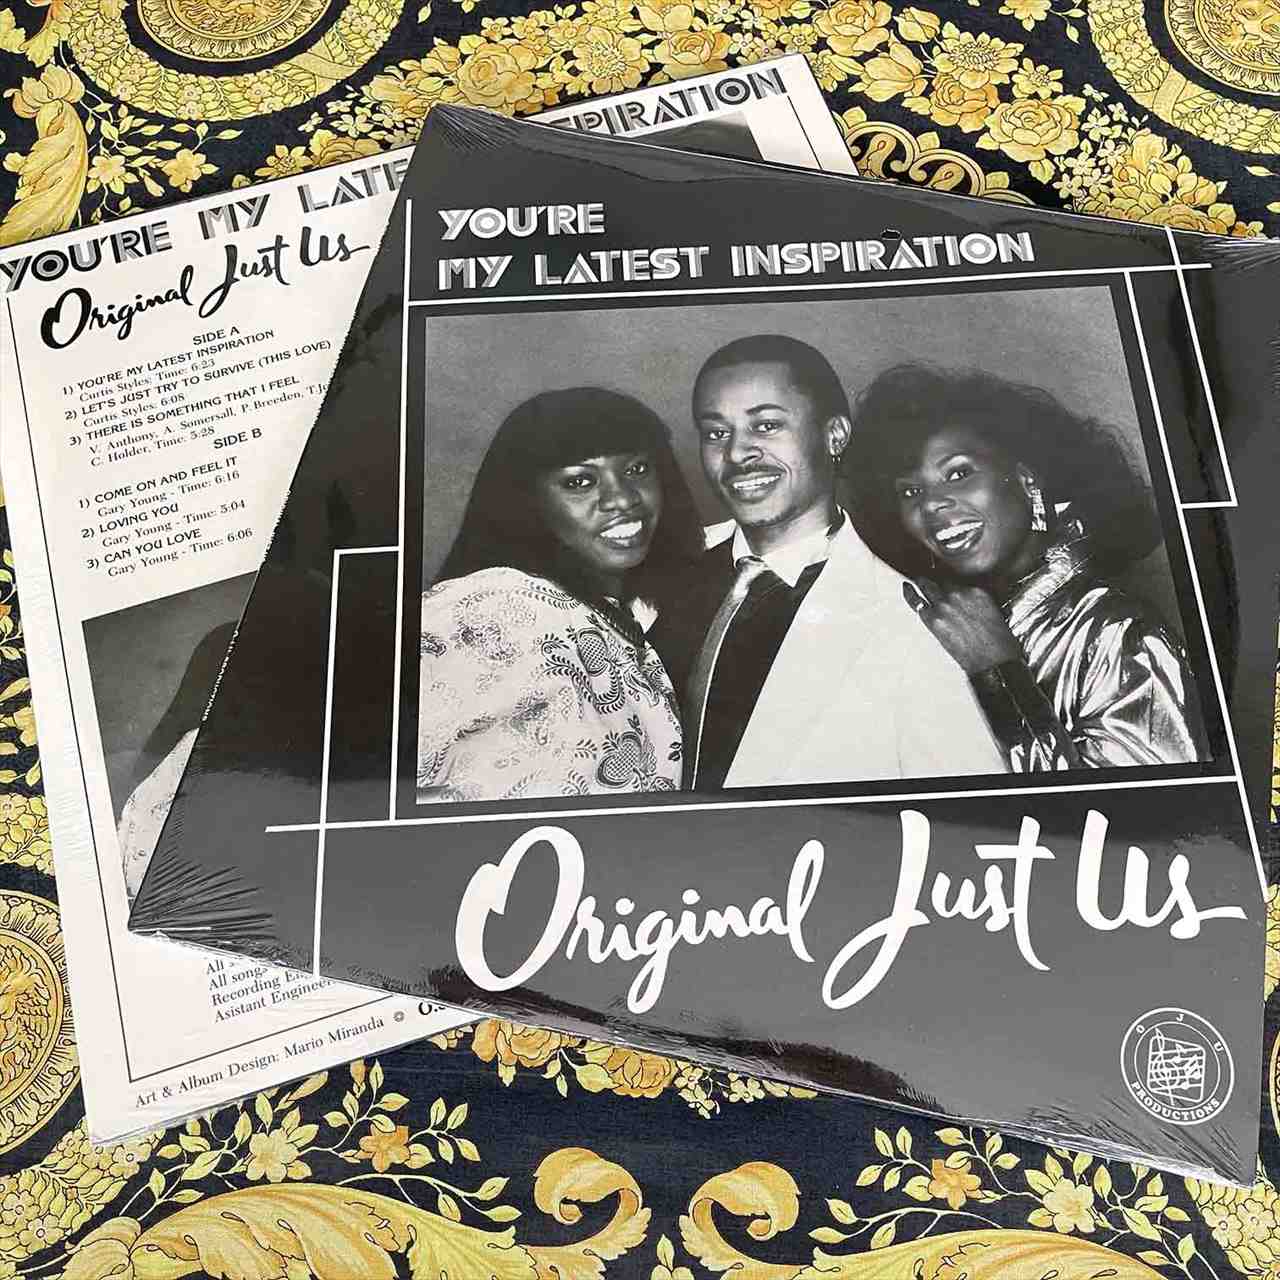 Original Just Us – Youre My Latest Inspiration 00_R